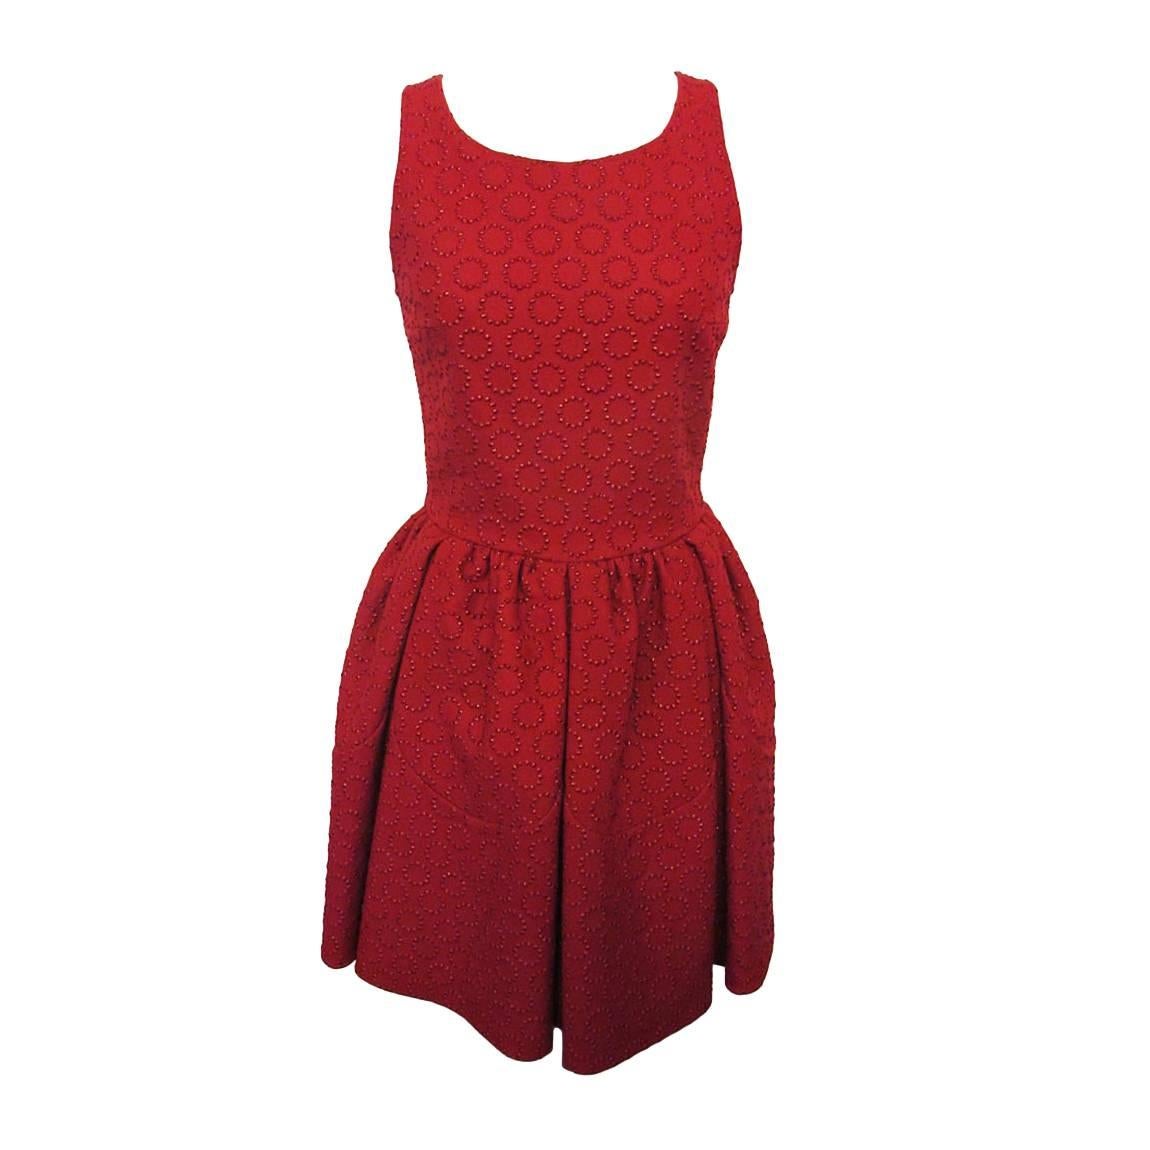 Alaïa Red Skater's Dress with Petal Shaped Insets in Skirt - 2013 NEW For Sale